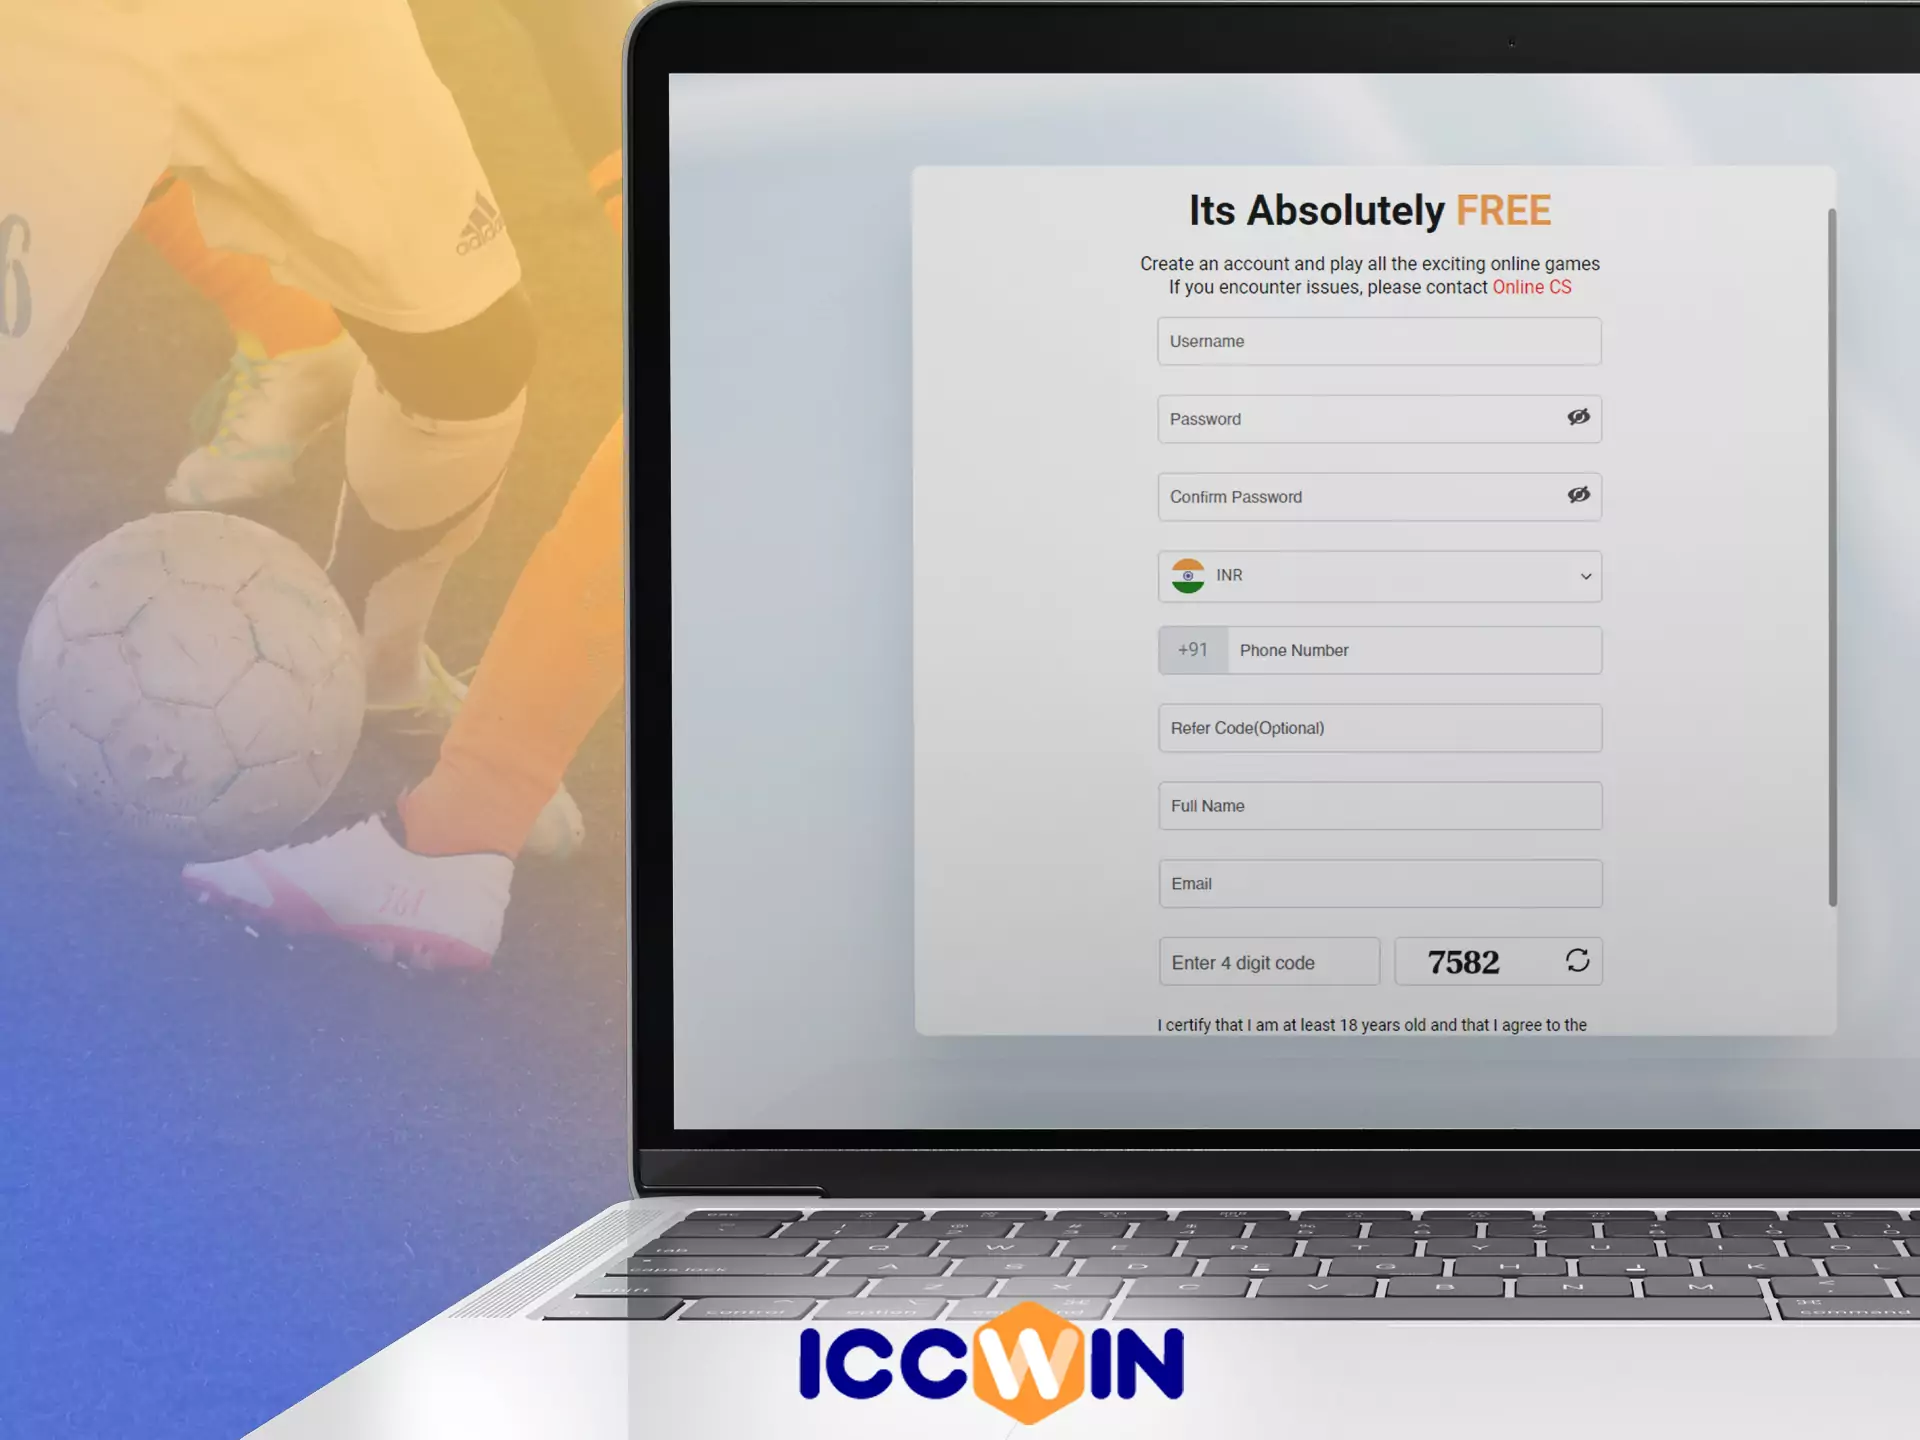 Create an account to start betting on the ICCWin website or in the app.